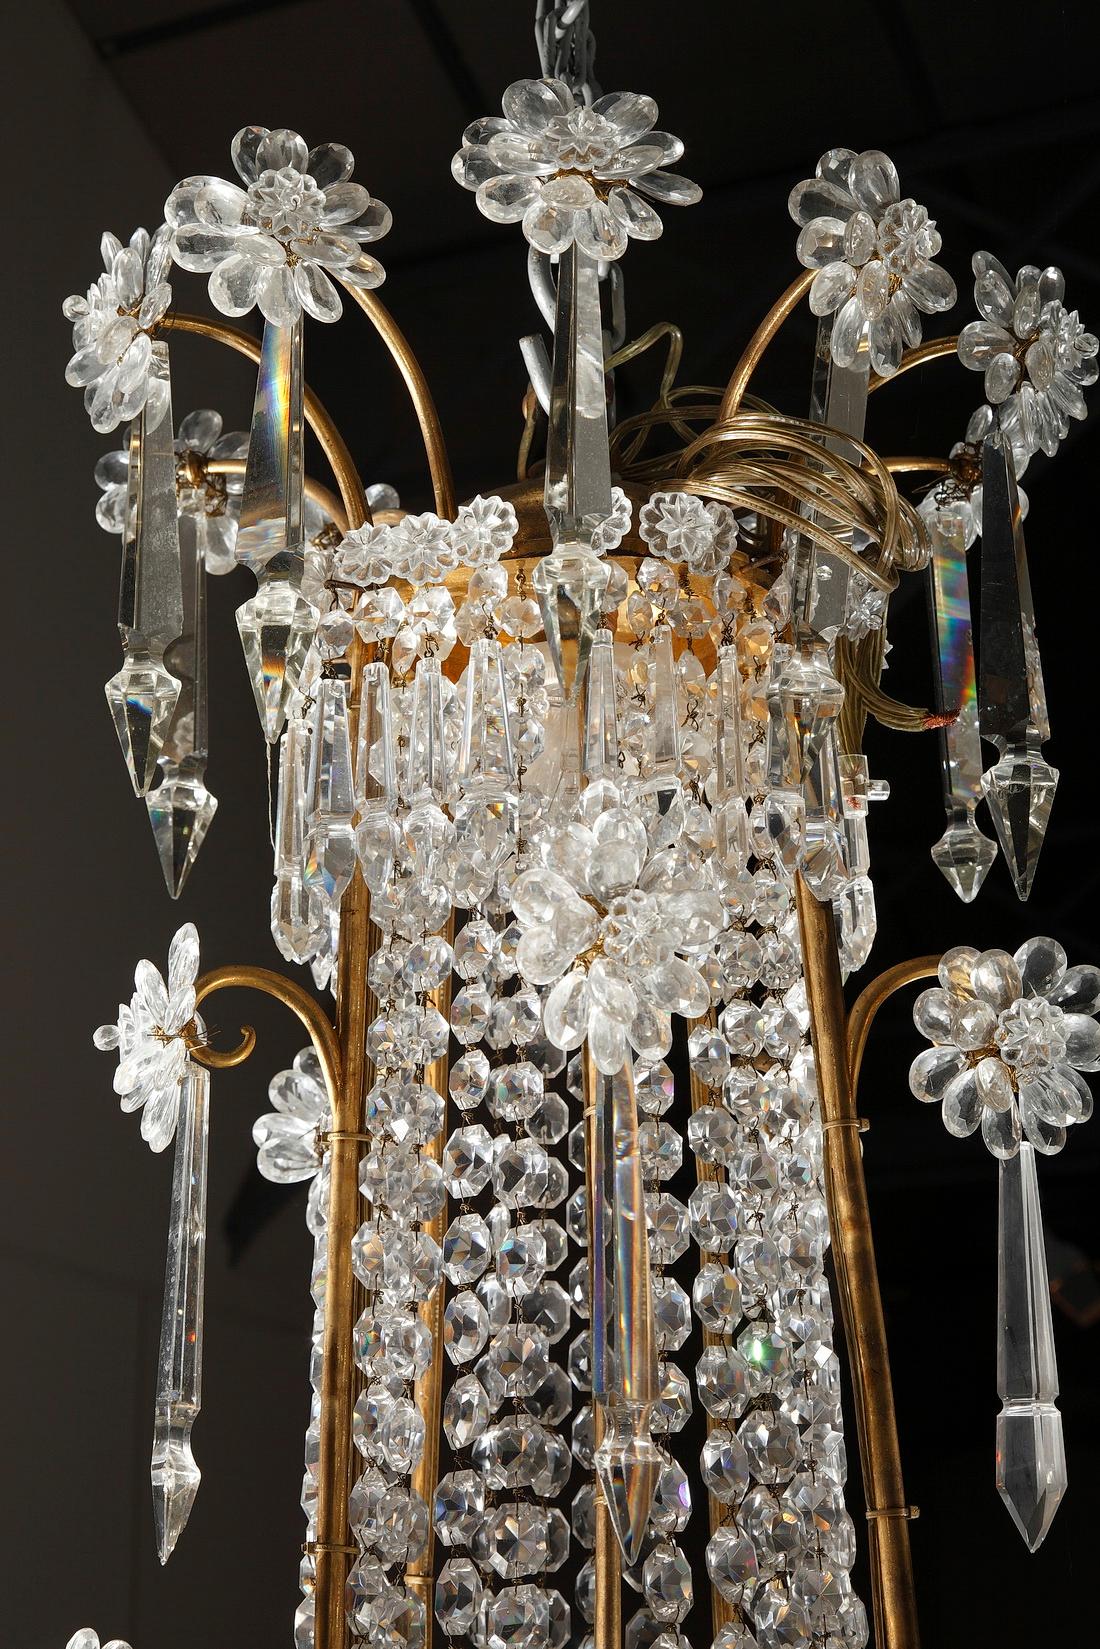 19th Century Magnificent Crystal Chandelier by Baccarat